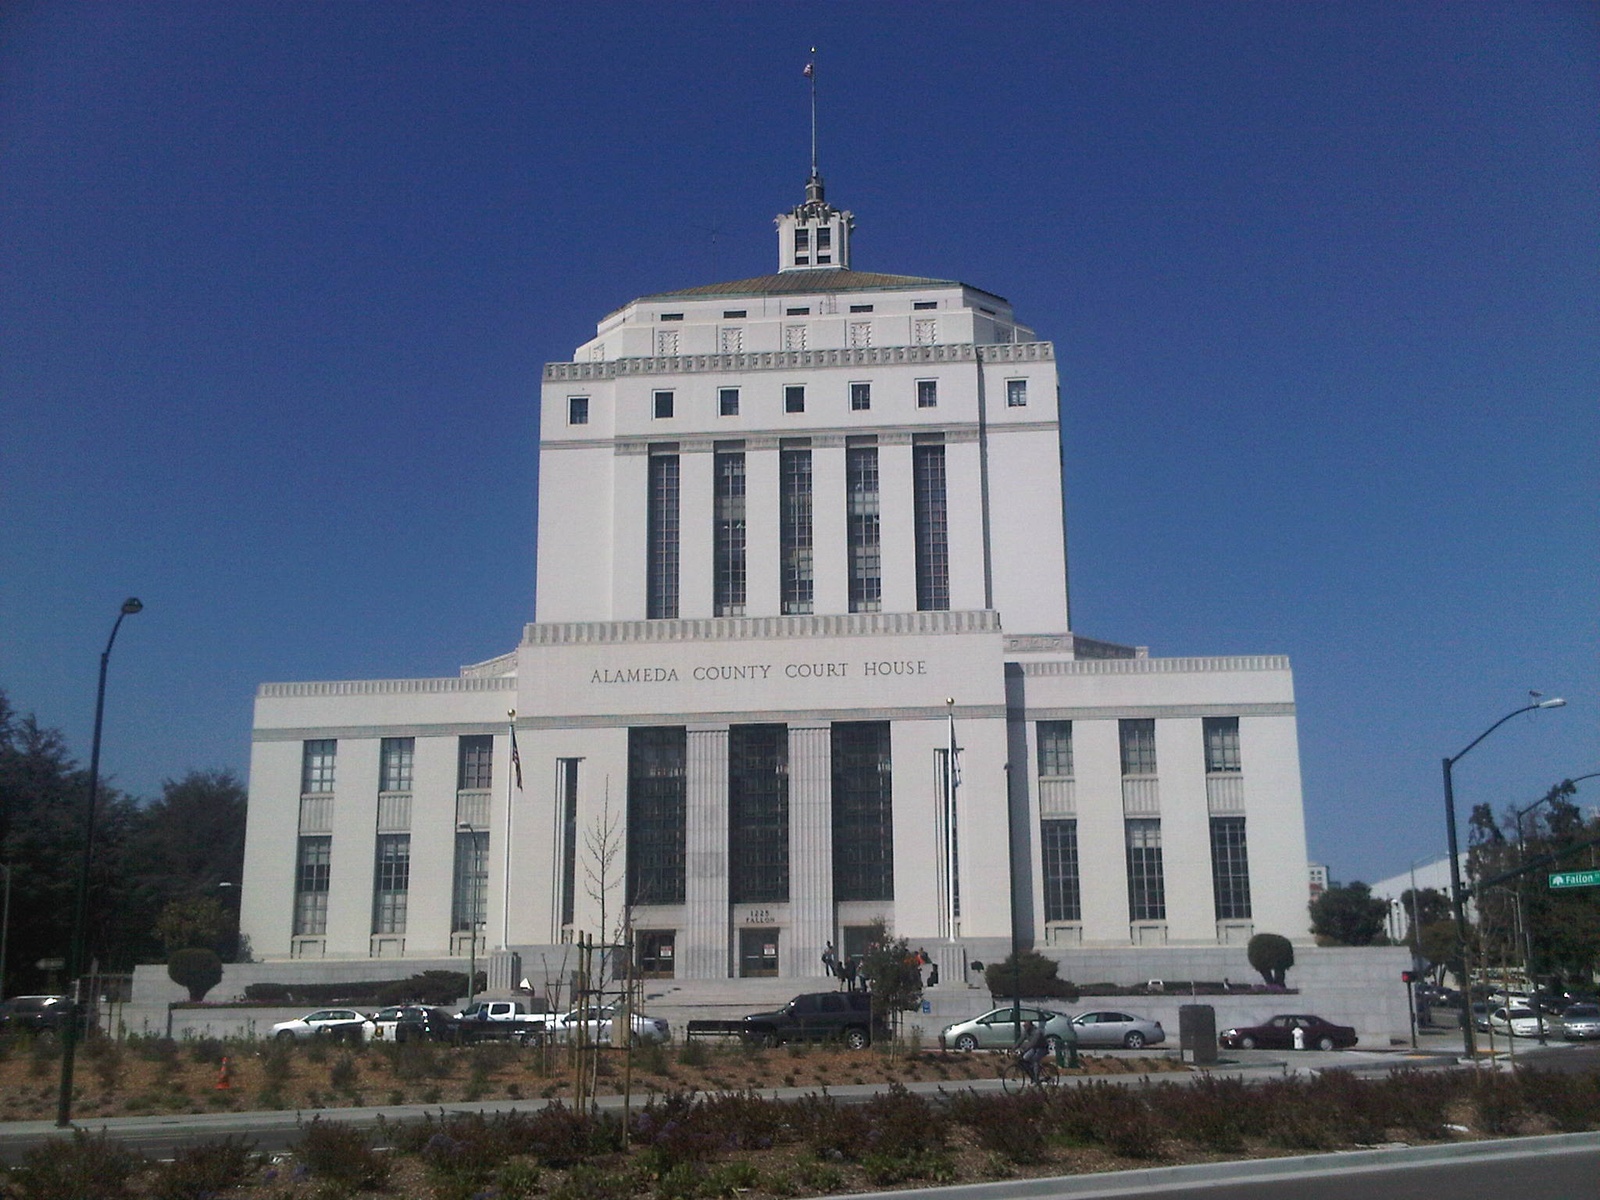 Information about quot Alameda County Court House IMG 20130322 24169 jpg